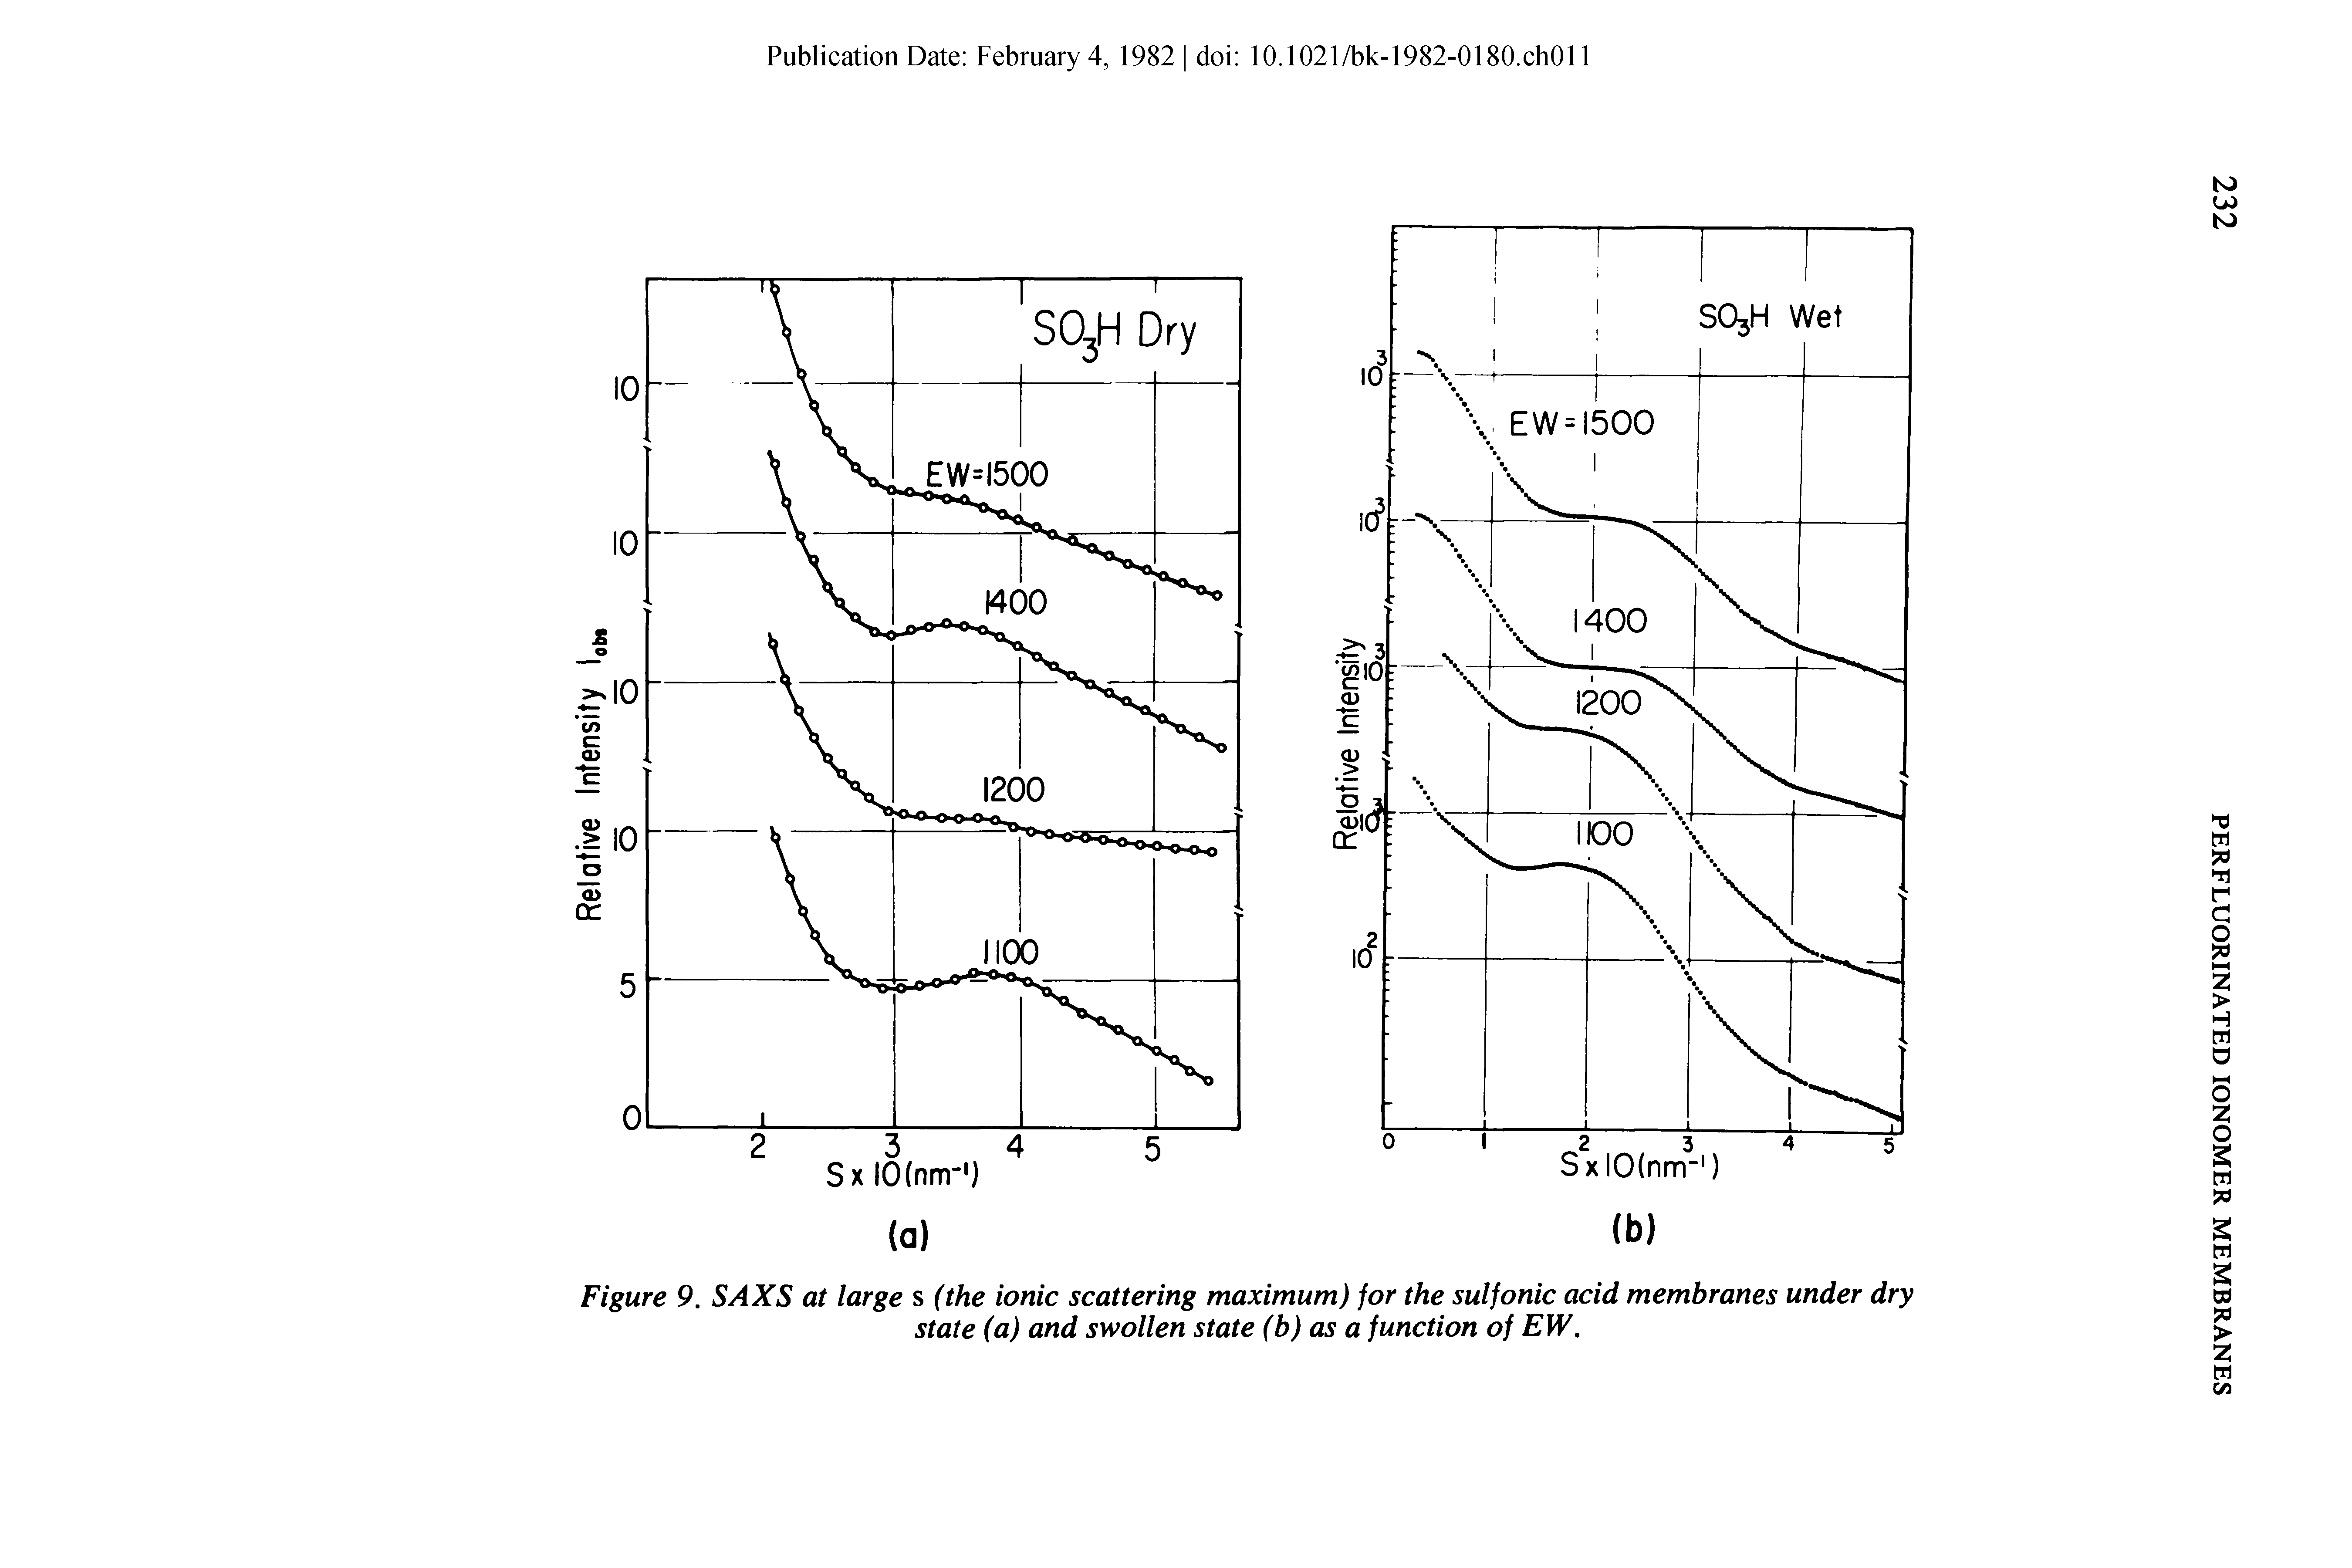 Figure 9. SAXS at large s (the ionic scattering maximum) for the sulfonic acid membranes under dry state (a) and swollen state (b) as a function of EW.